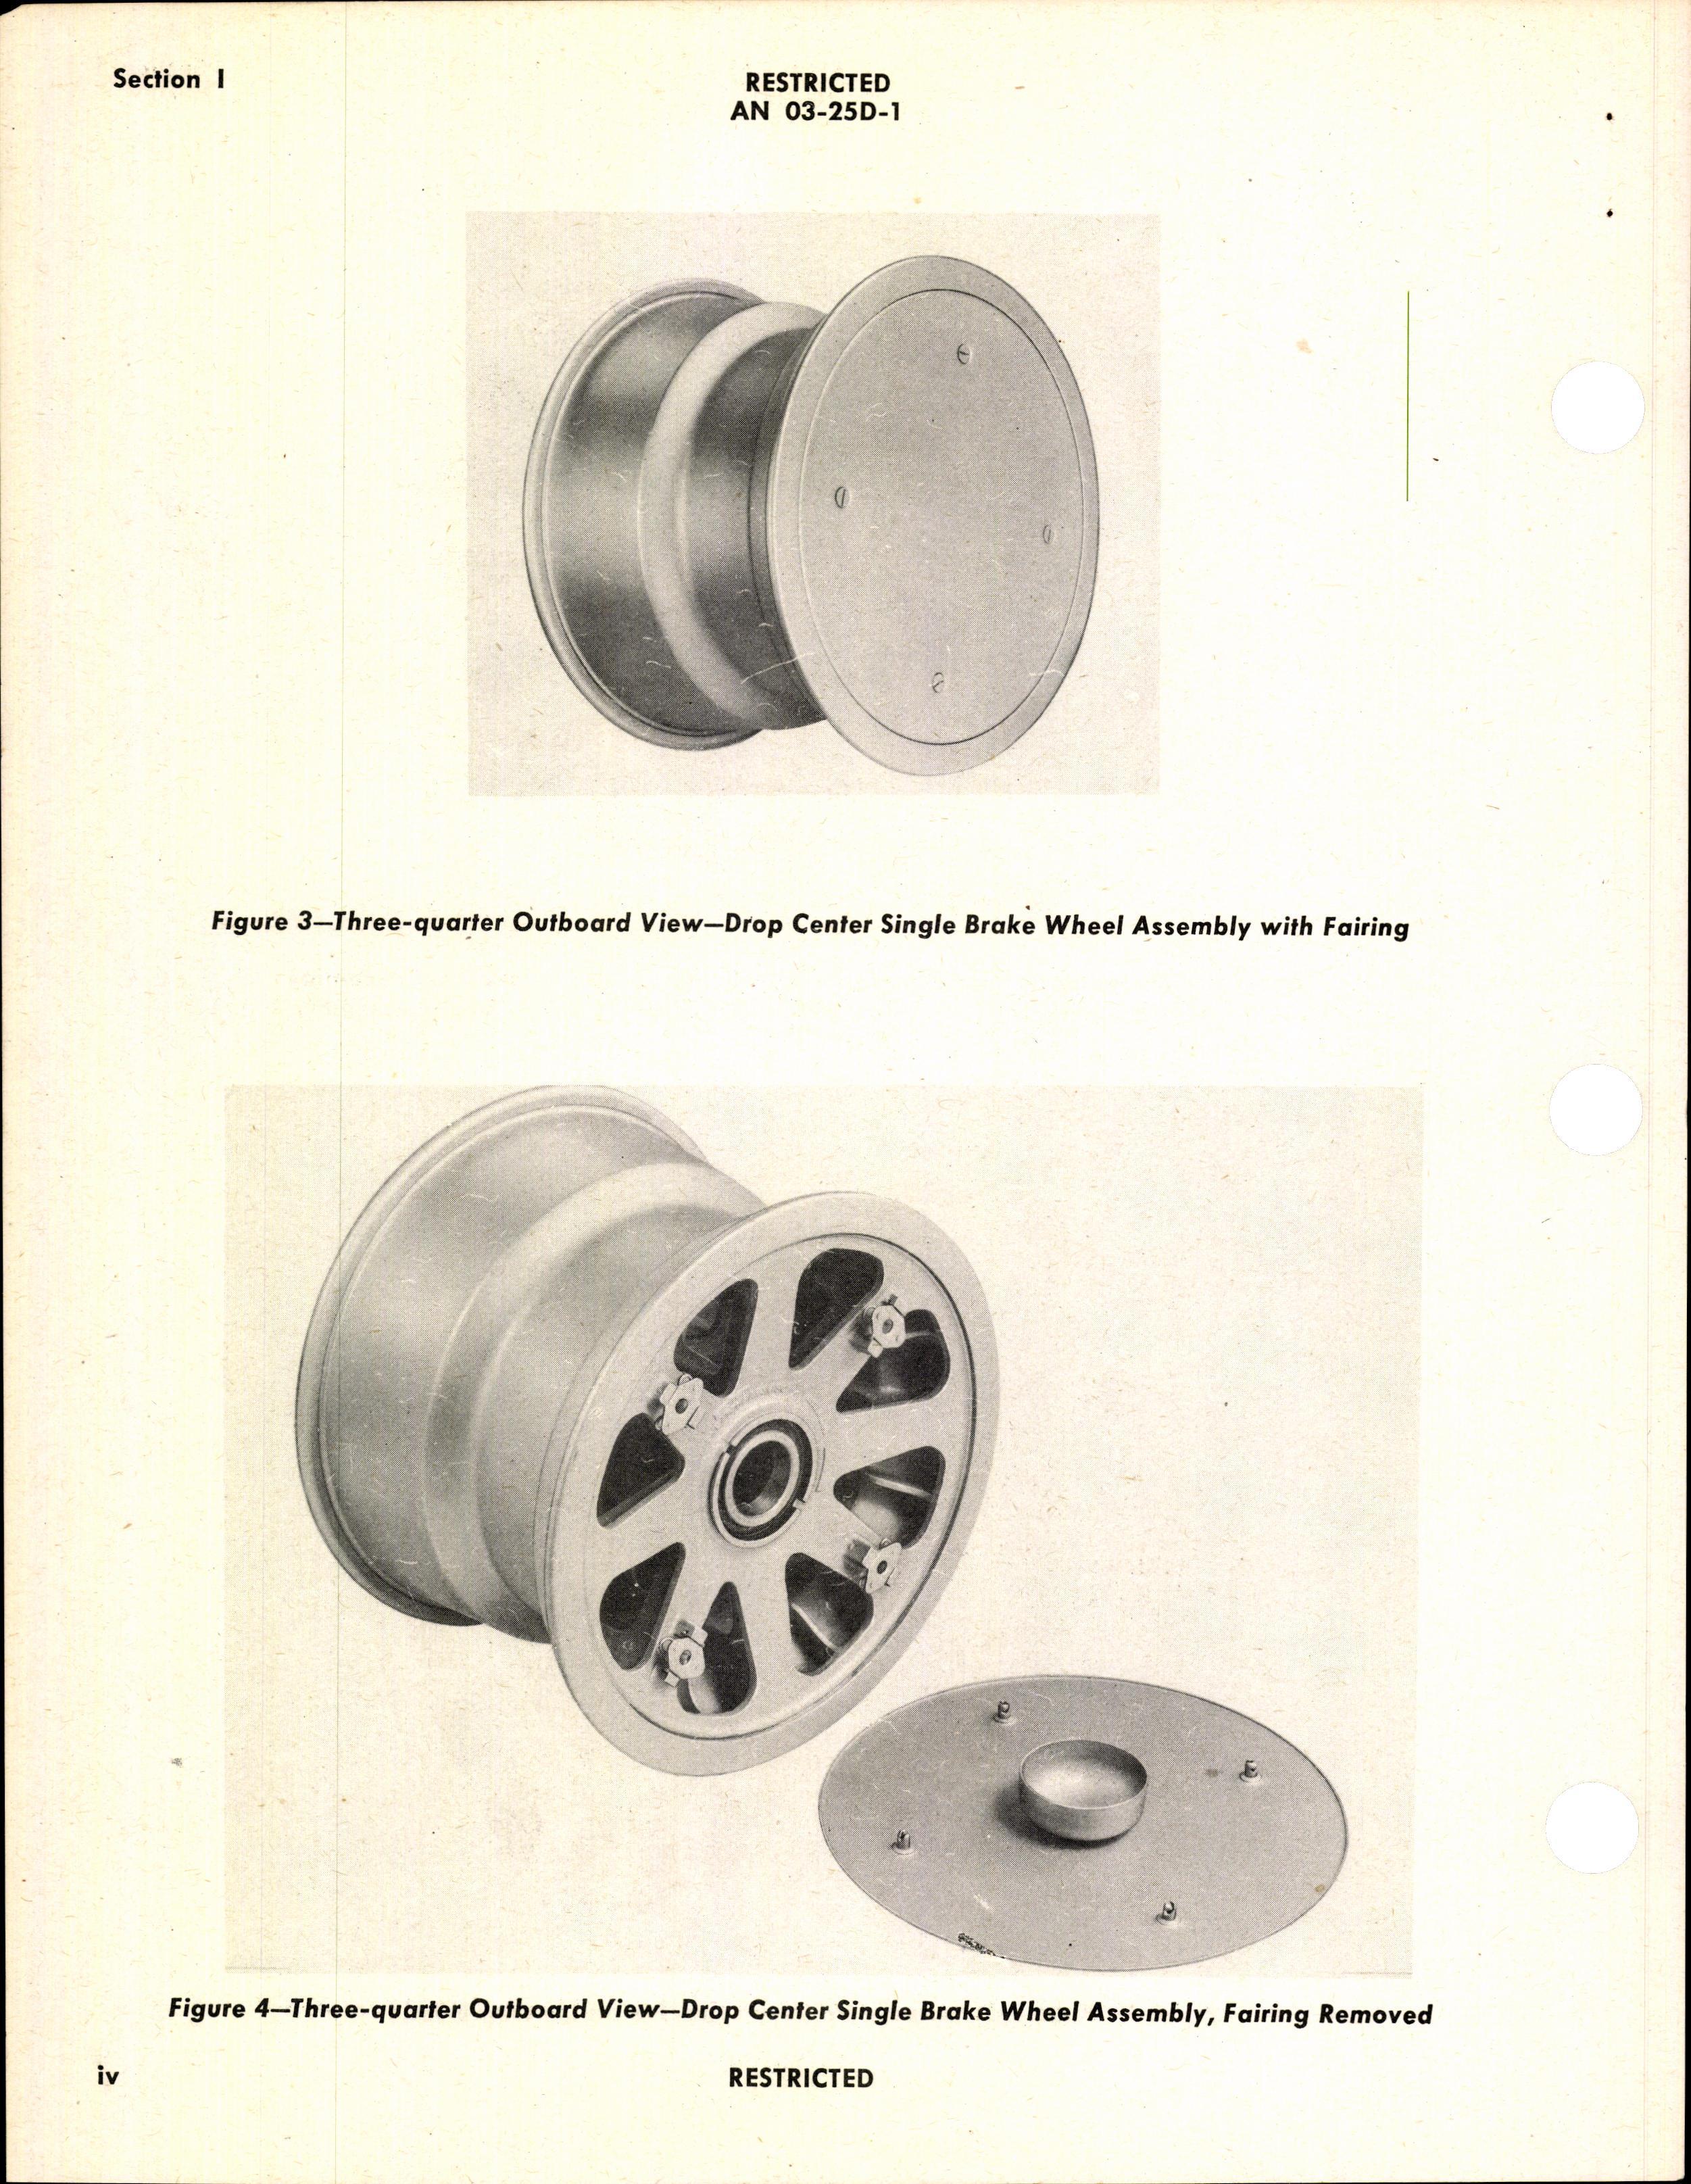 Sample page 6 from AirCorps Library document: Operation, Service, & Overhaul Instructions with Parts Catalog for Landing Wheels For Use With Multiple Disc Brakes